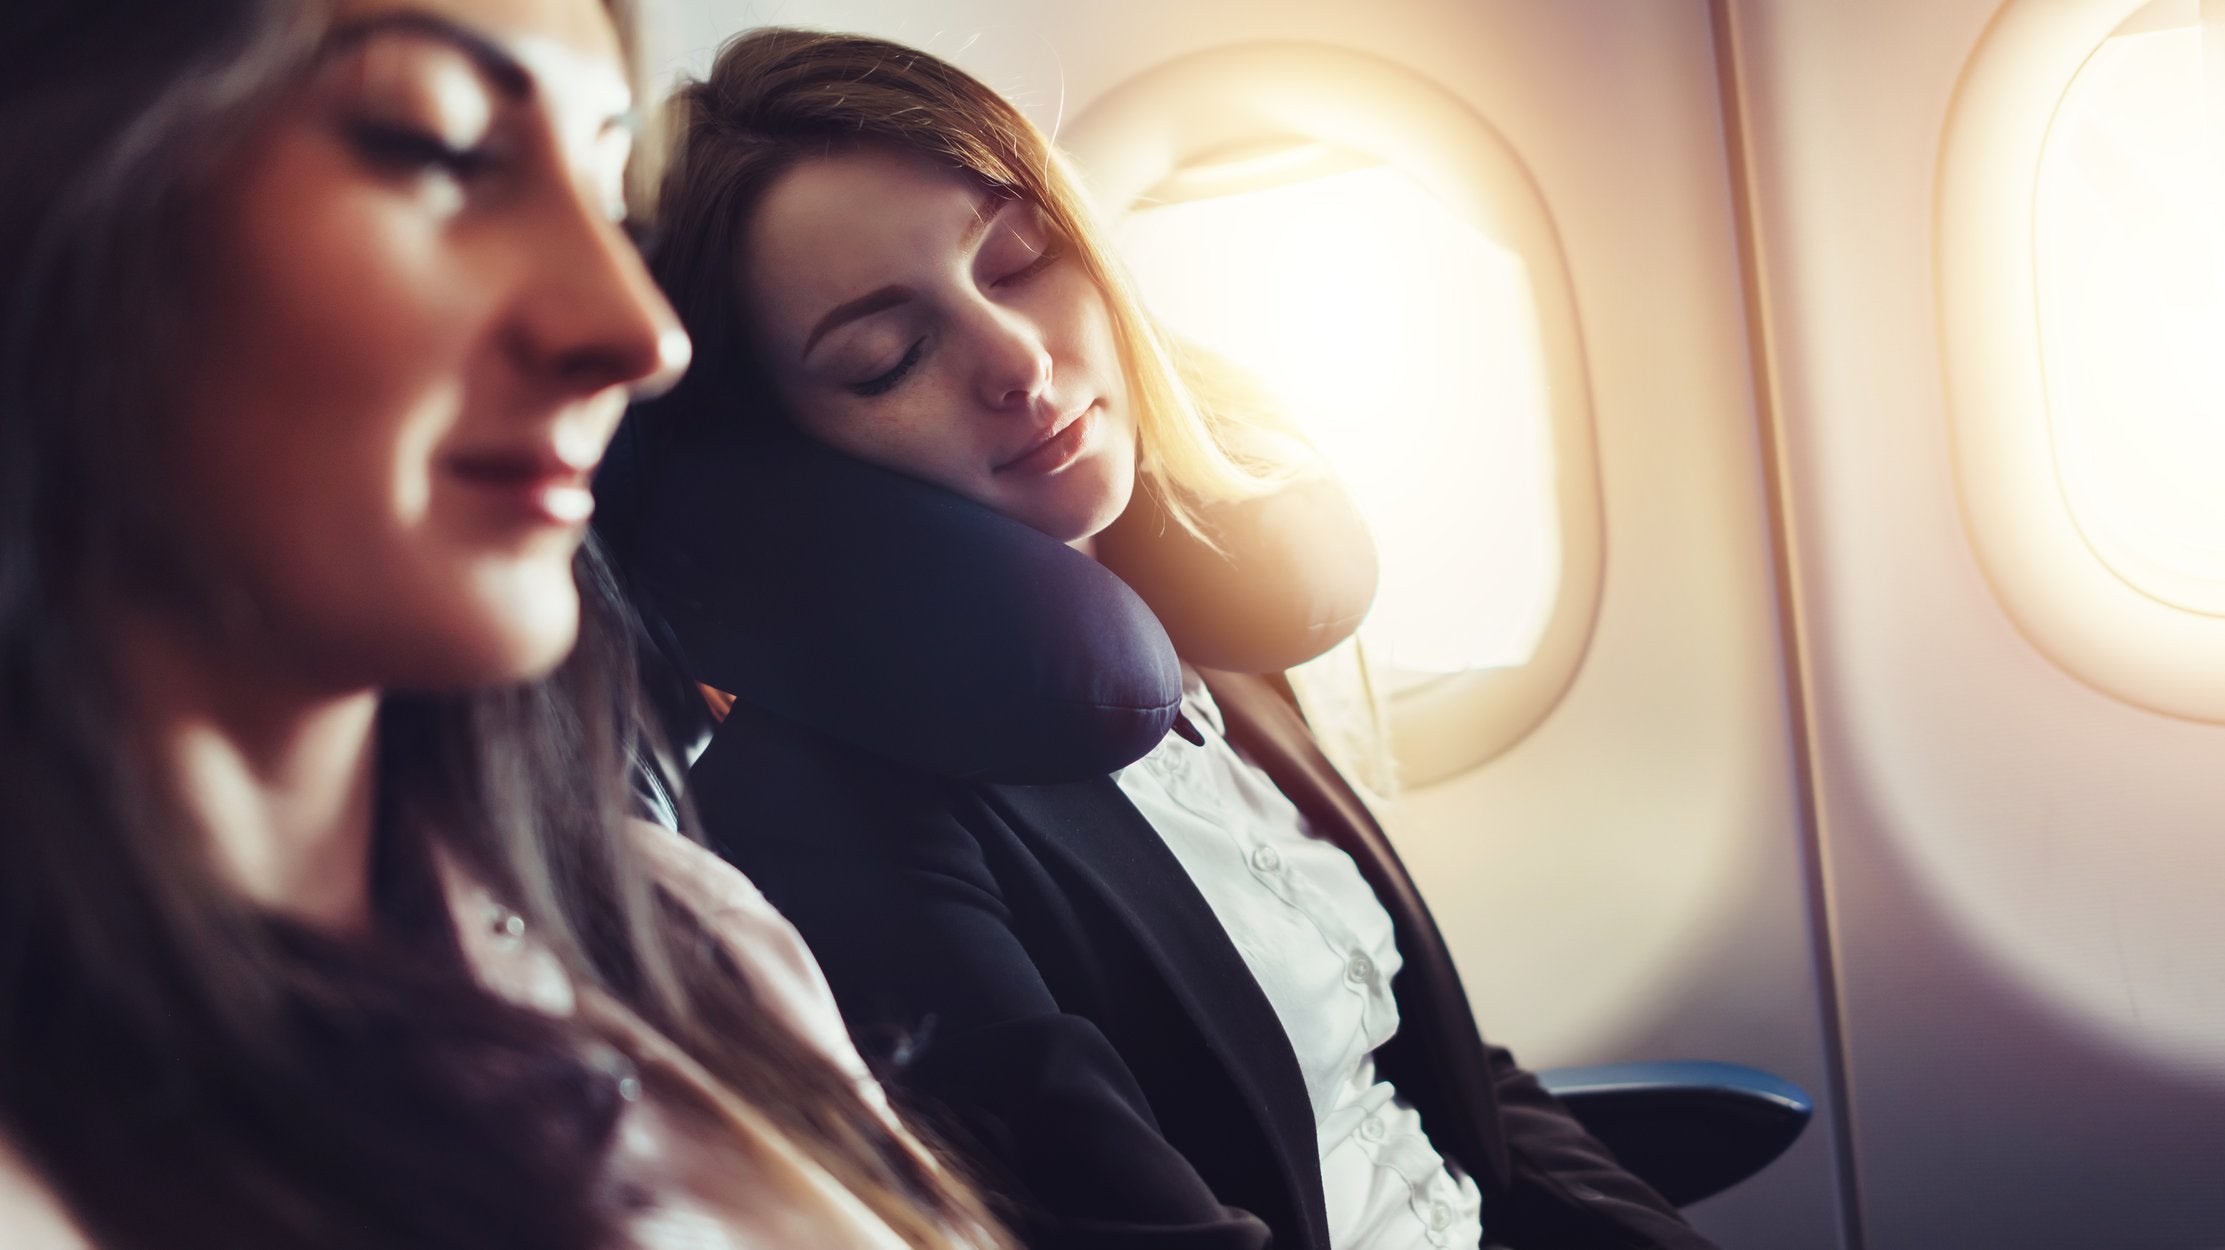 two women sitting inside a plane, with one sleeping in the back and the other slightly blurry in the front, both wearing relaxed facial expressions